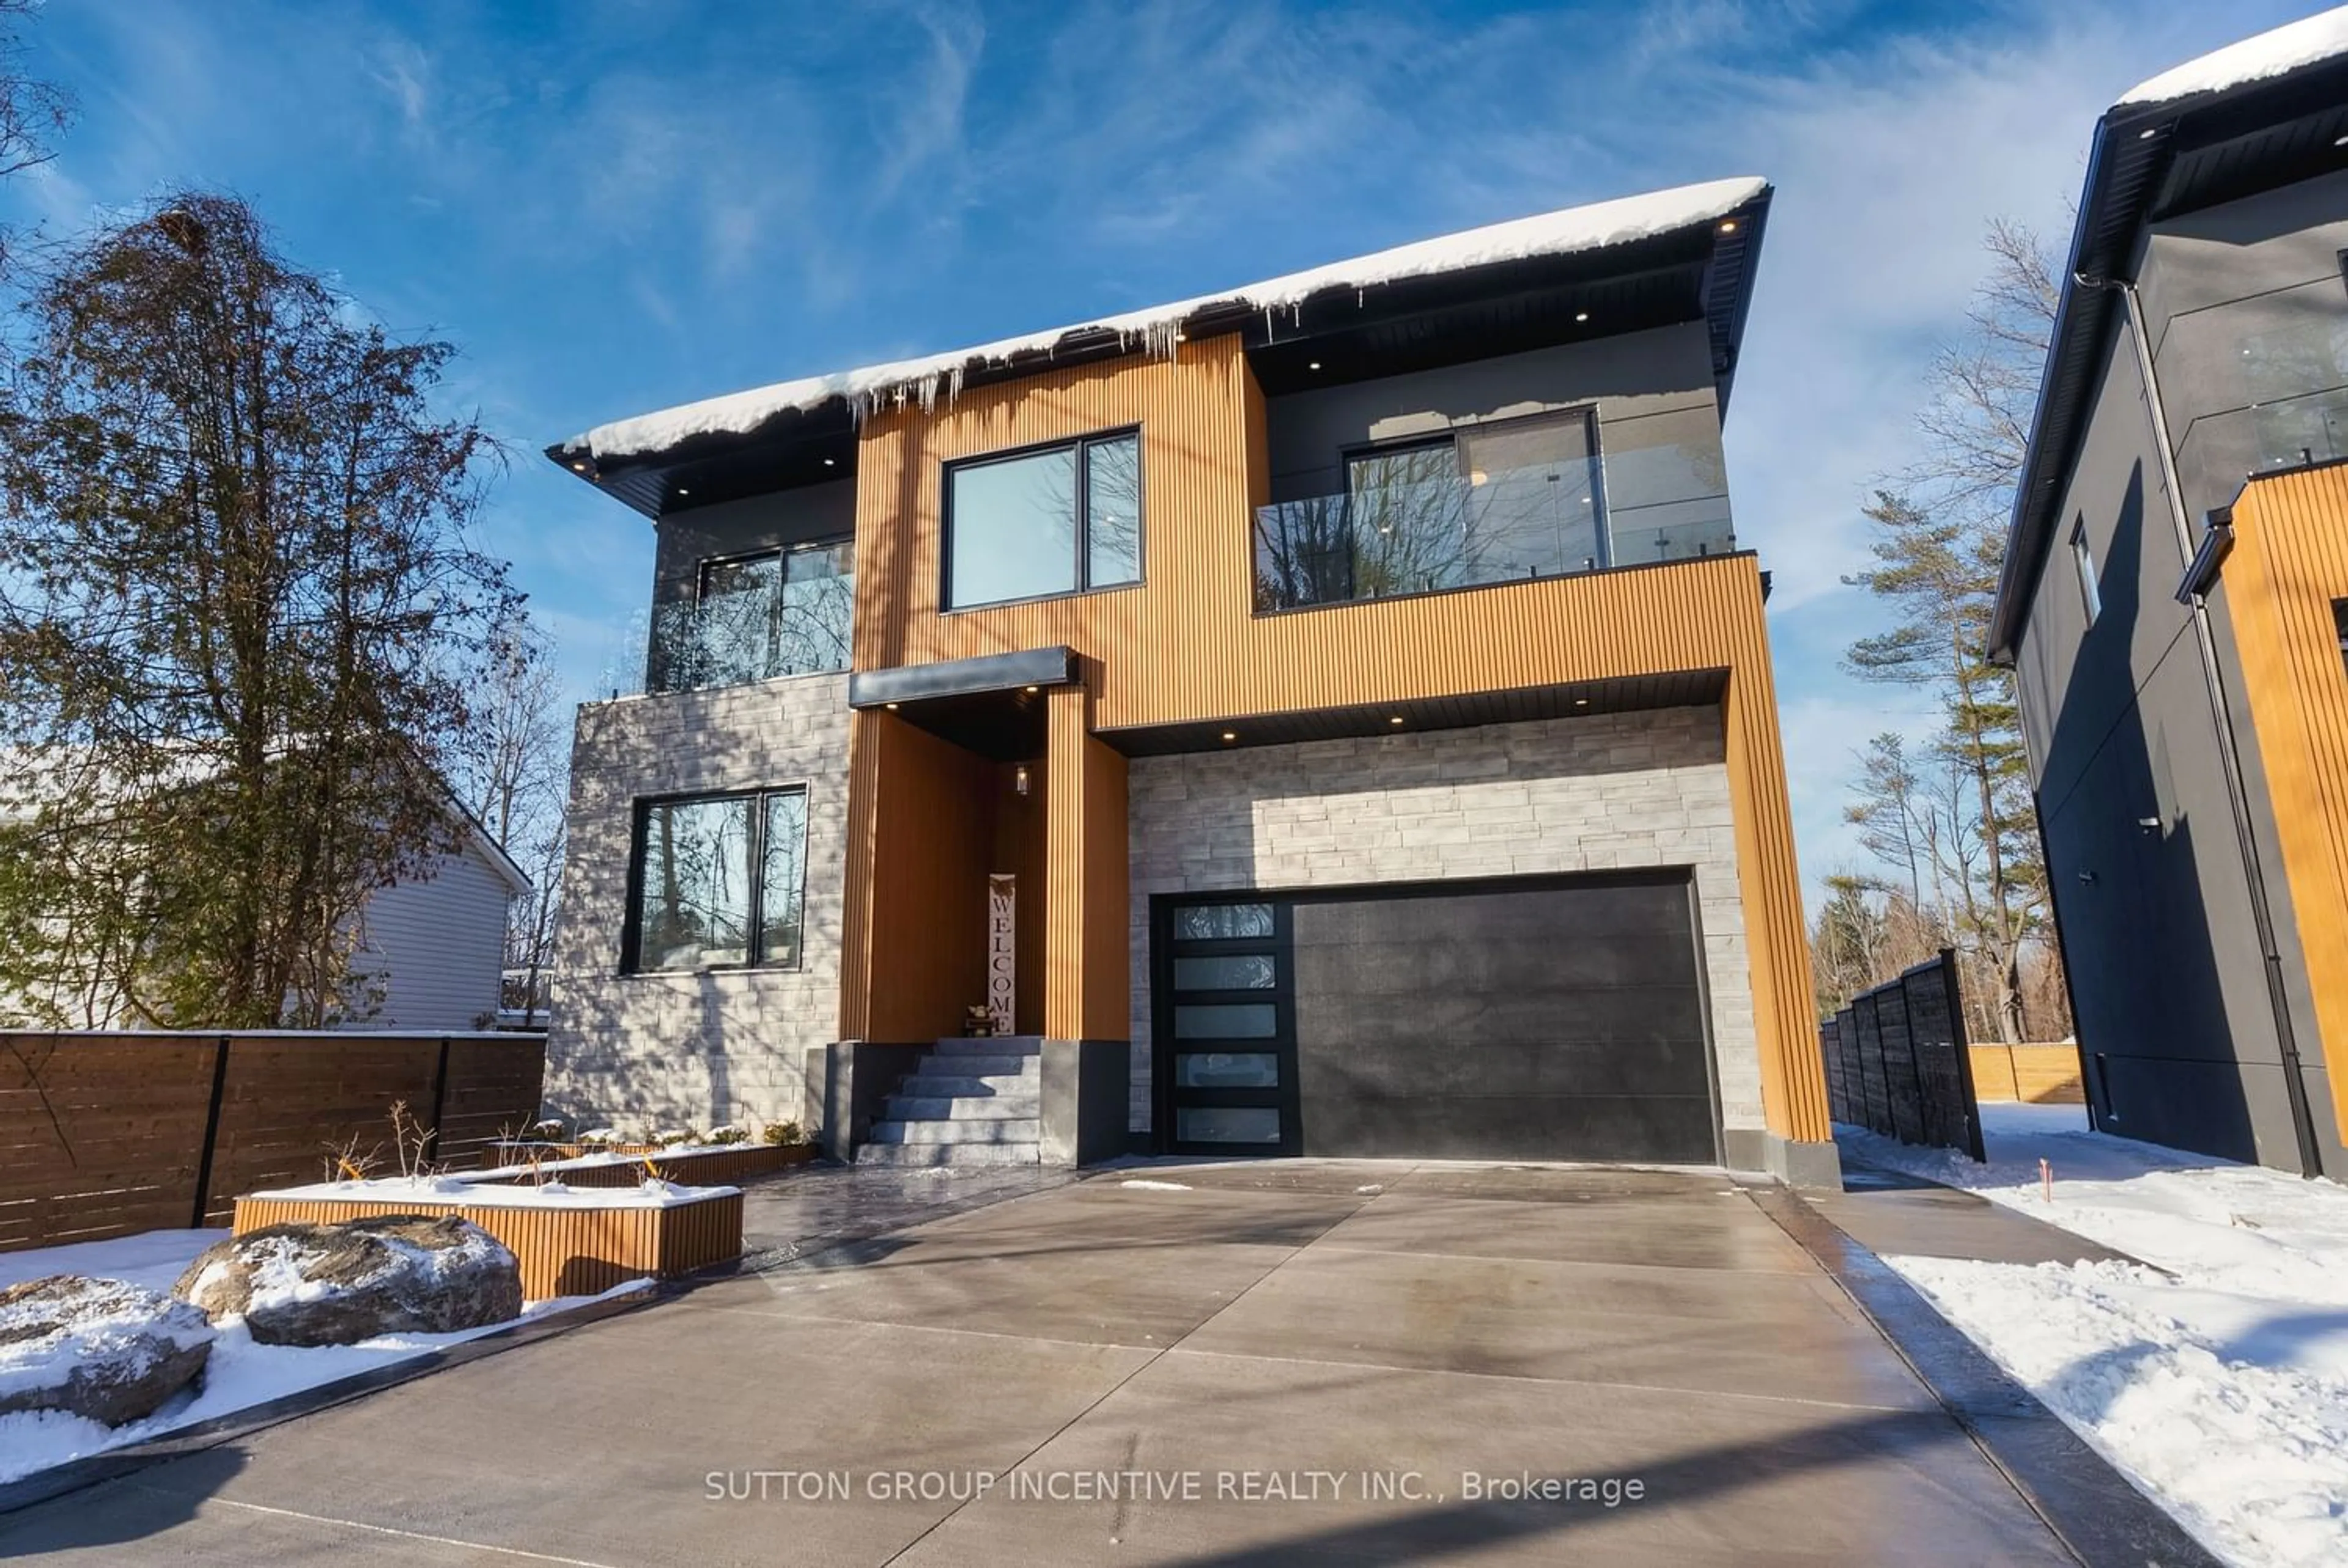 Home with stucco exterior material for 1772 Wingrove Ave, Innisfil Ontario L9S 1S4